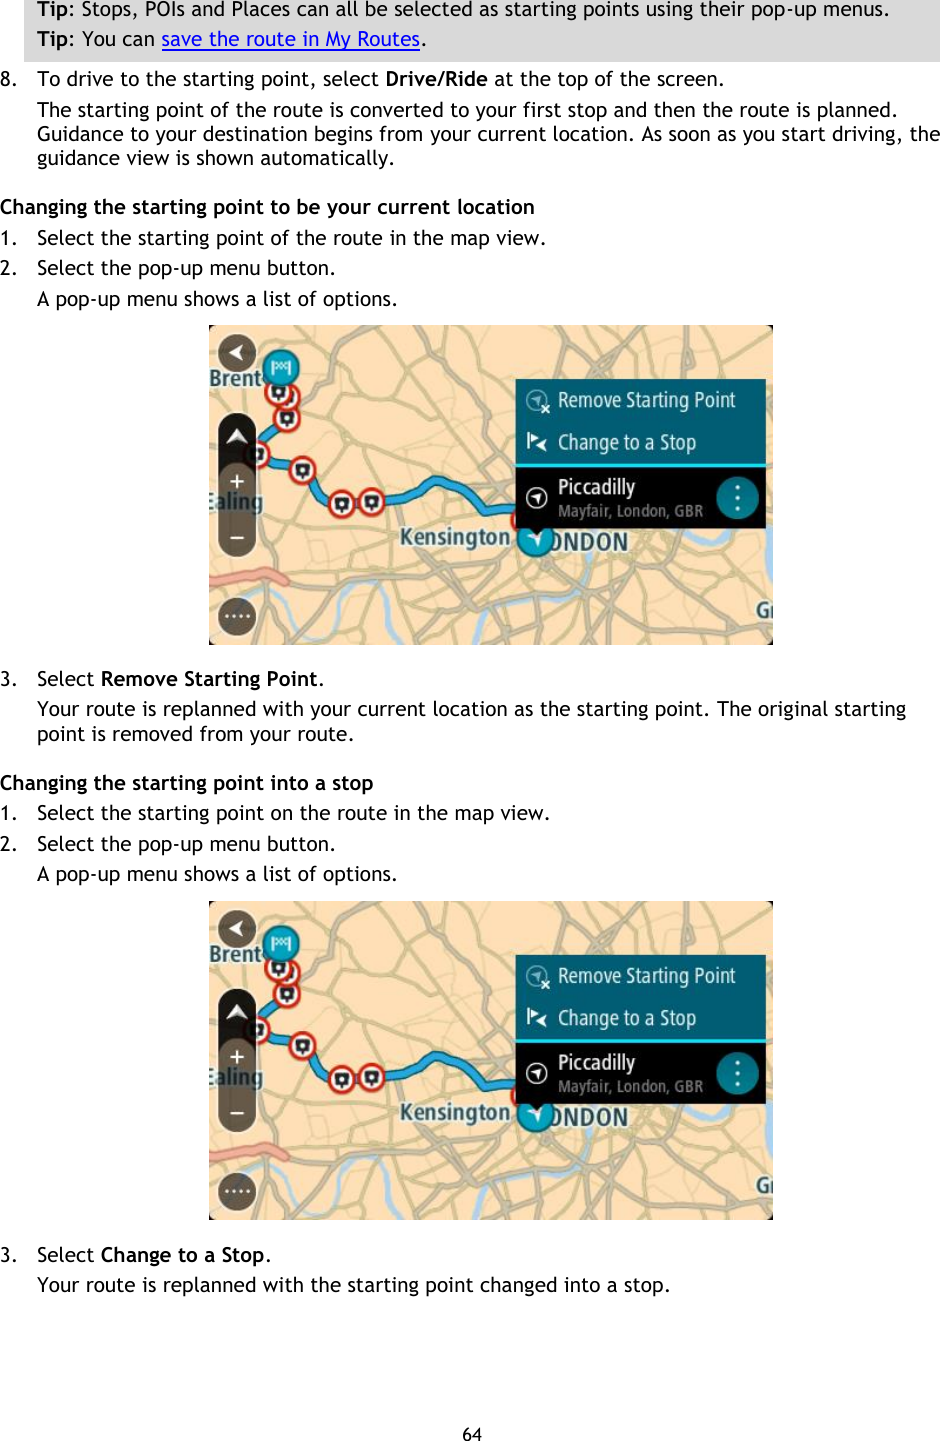 64    Tip: Stops, POIs and Places can all be selected as starting points using their pop-up menus. Tip: You can save the route in My Routes. 8. To drive to the starting point, select Drive/Ride at the top of the screen. The starting point of the route is converted to your first stop and then the route is planned. Guidance to your destination begins from your current location. As soon as you start driving, the guidance view is shown automatically. Changing the starting point to be your current location 1. Select the starting point of the route in the map view. 2. Select the pop-up menu button. A pop-up menu shows a list of options.    3. Select Remove Starting Point. Your route is replanned with your current location as the starting point. The original starting point is removed from your route. Changing the starting point into a stop 1. Select the starting point on the route in the map view. 2. Select the pop-up menu button. A pop-up menu shows a list of options.    3. Select Change to a Stop. Your route is replanned with the starting point changed into a stop.  